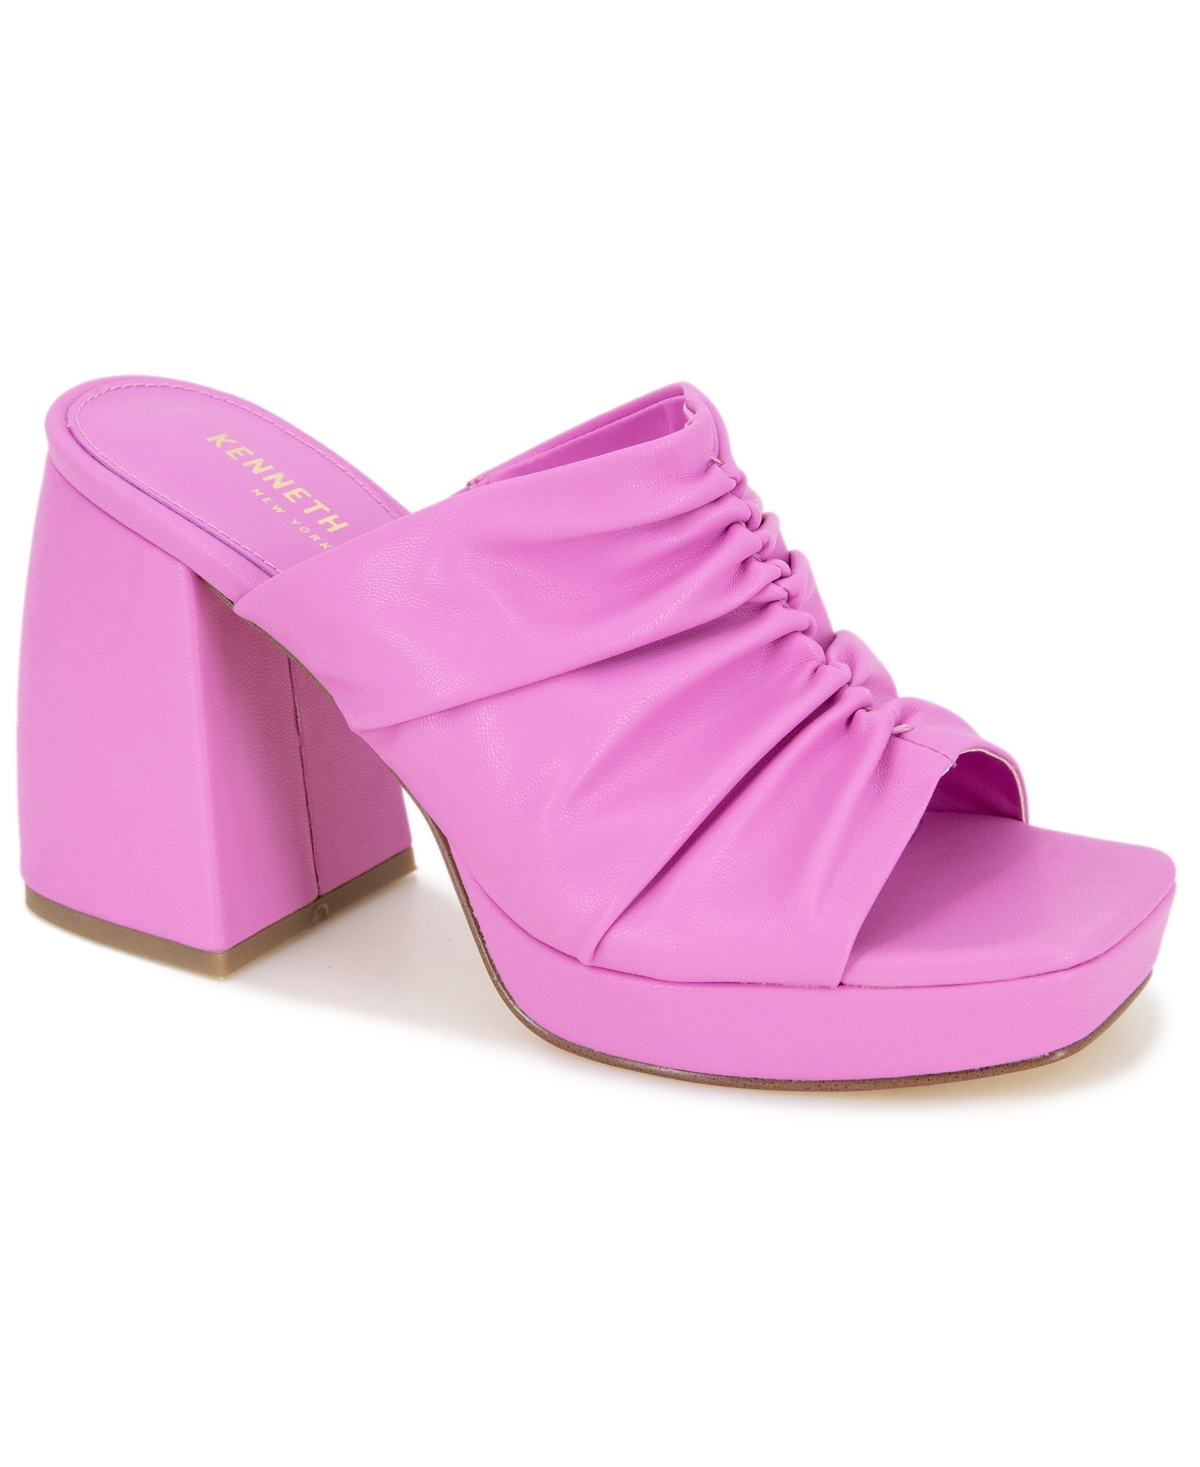 Kenneth Cole New York Women's Anika Platform Mules Women's Shoes In Pink